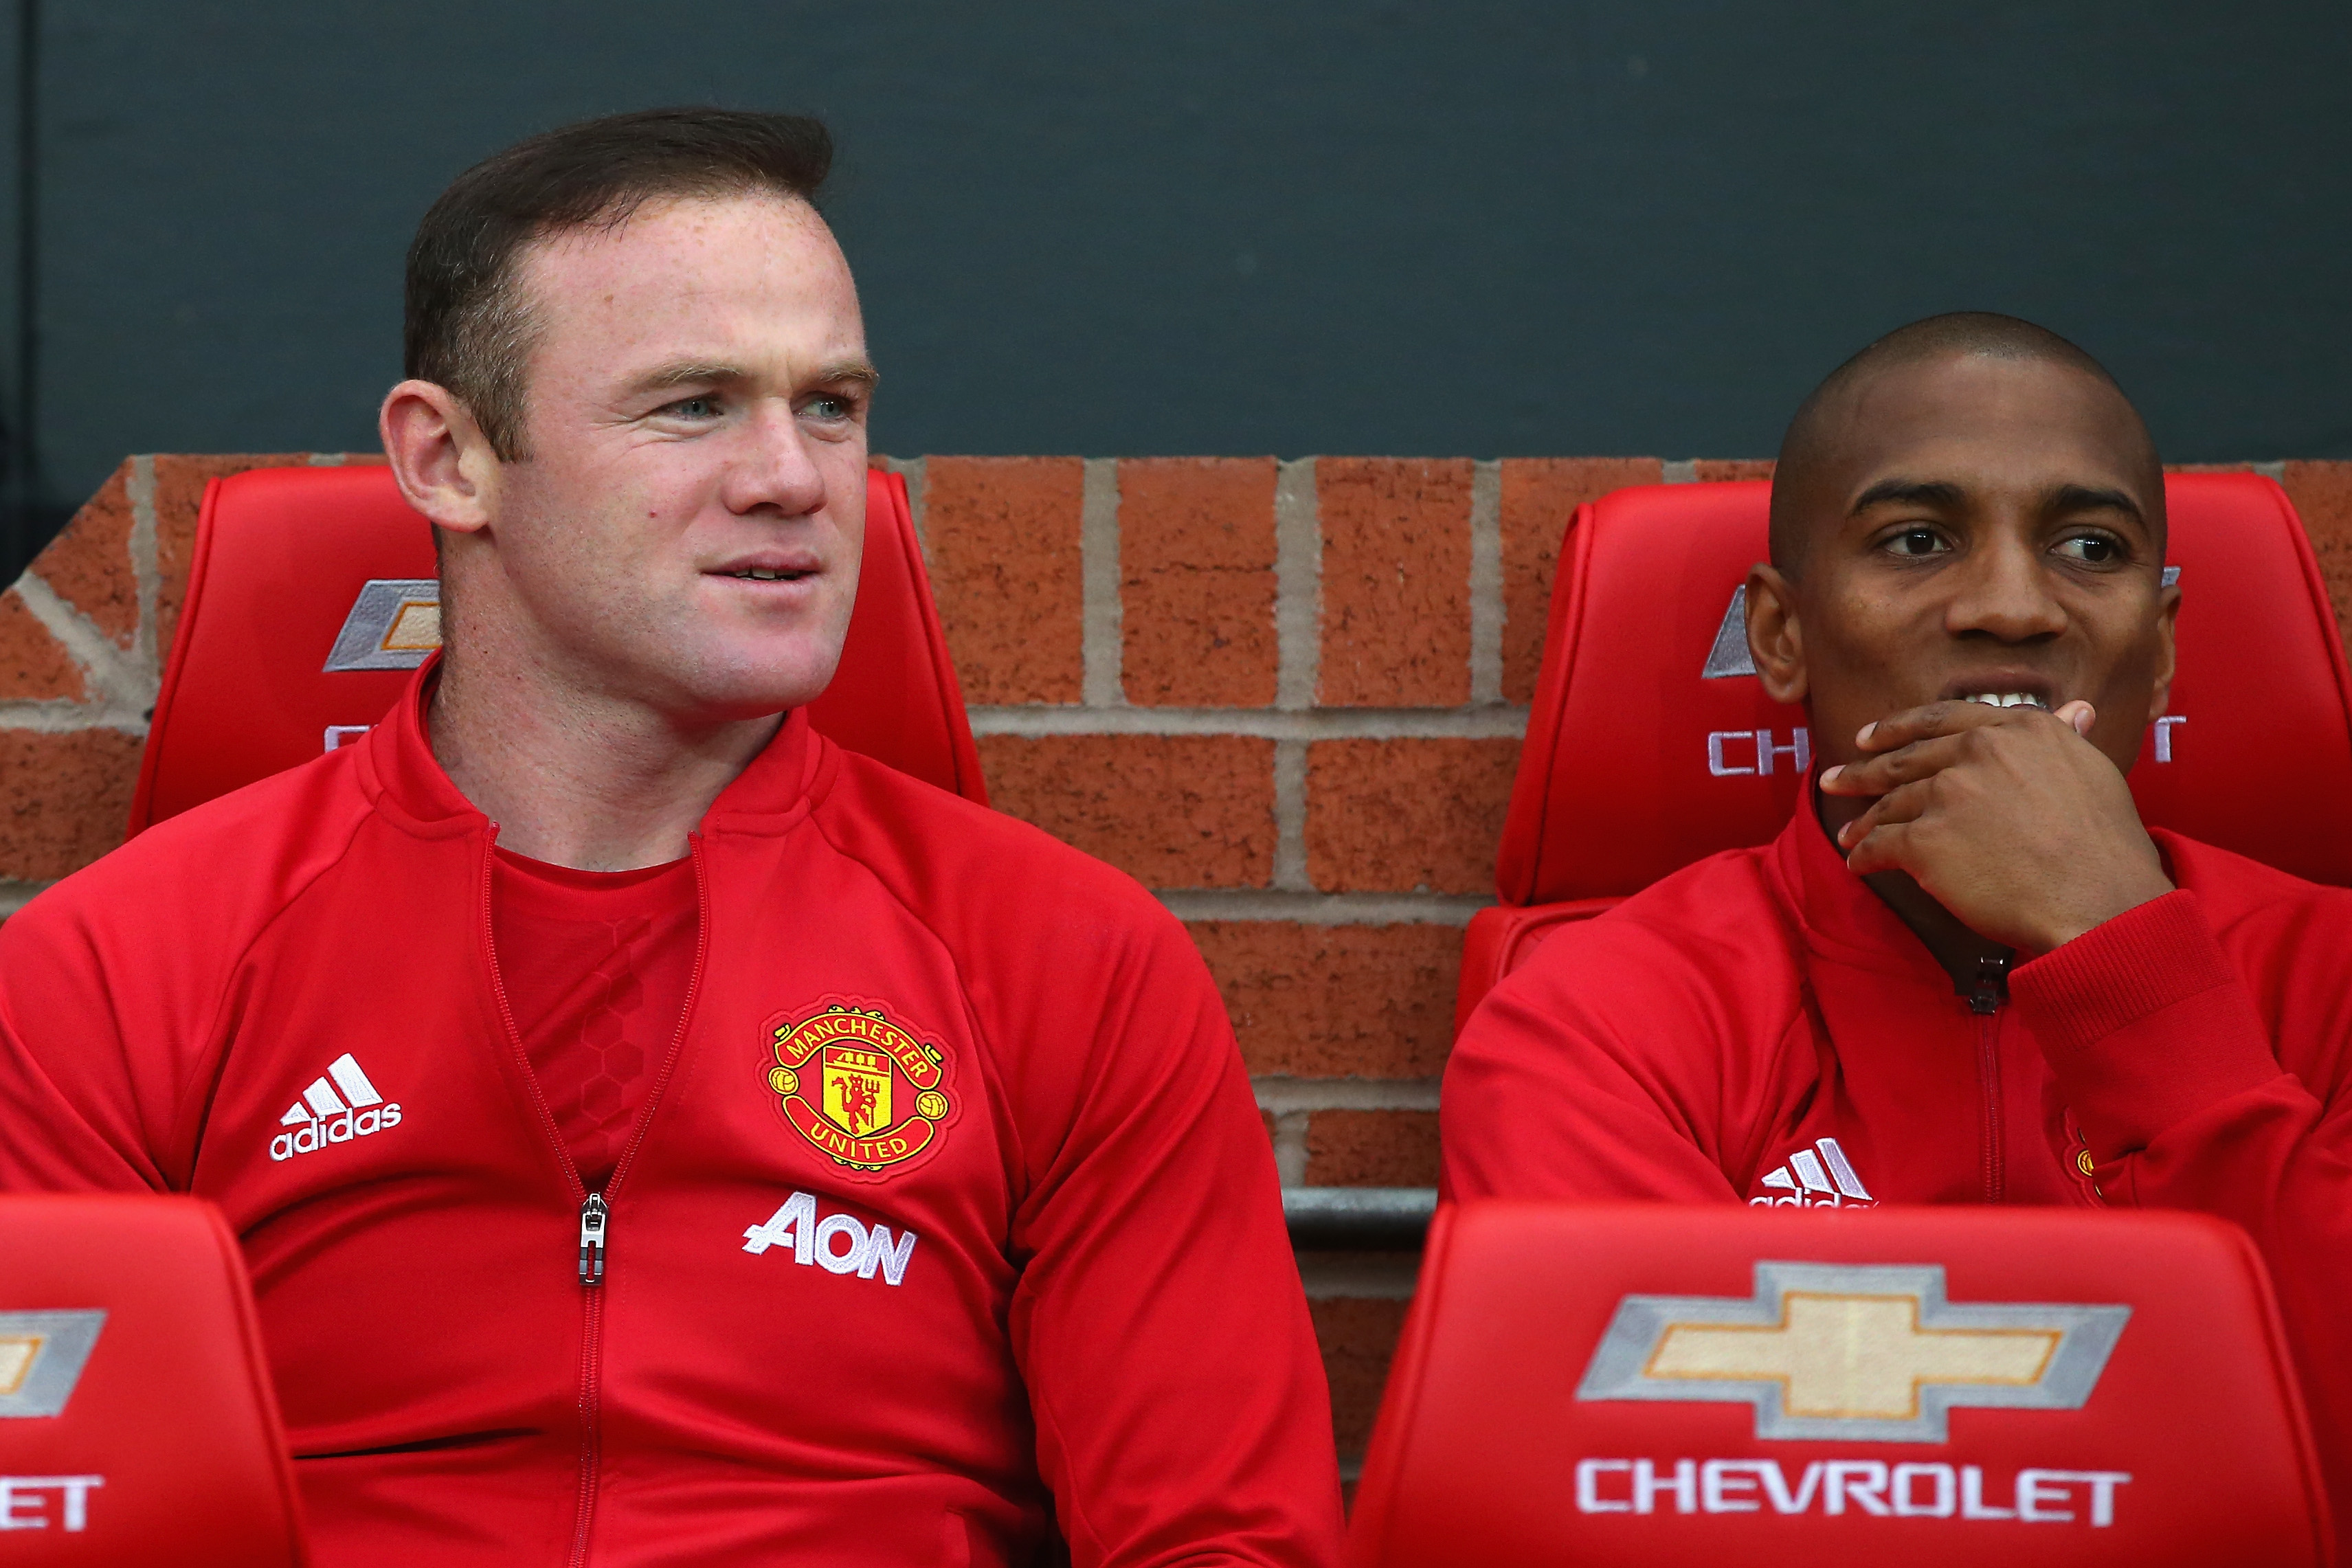 MANCHESTER, ENGLAND - OCTOBER 29: Wayne Rooney of Manchester United (L) takes his place on the bench with Ashley Young of Manchester United (R) during the Premier League match between Manchester United and Burnley at Old Trafford on October 29, 2016 in Manchester, England.  (Photo by Alex Livesey/Getty Images)